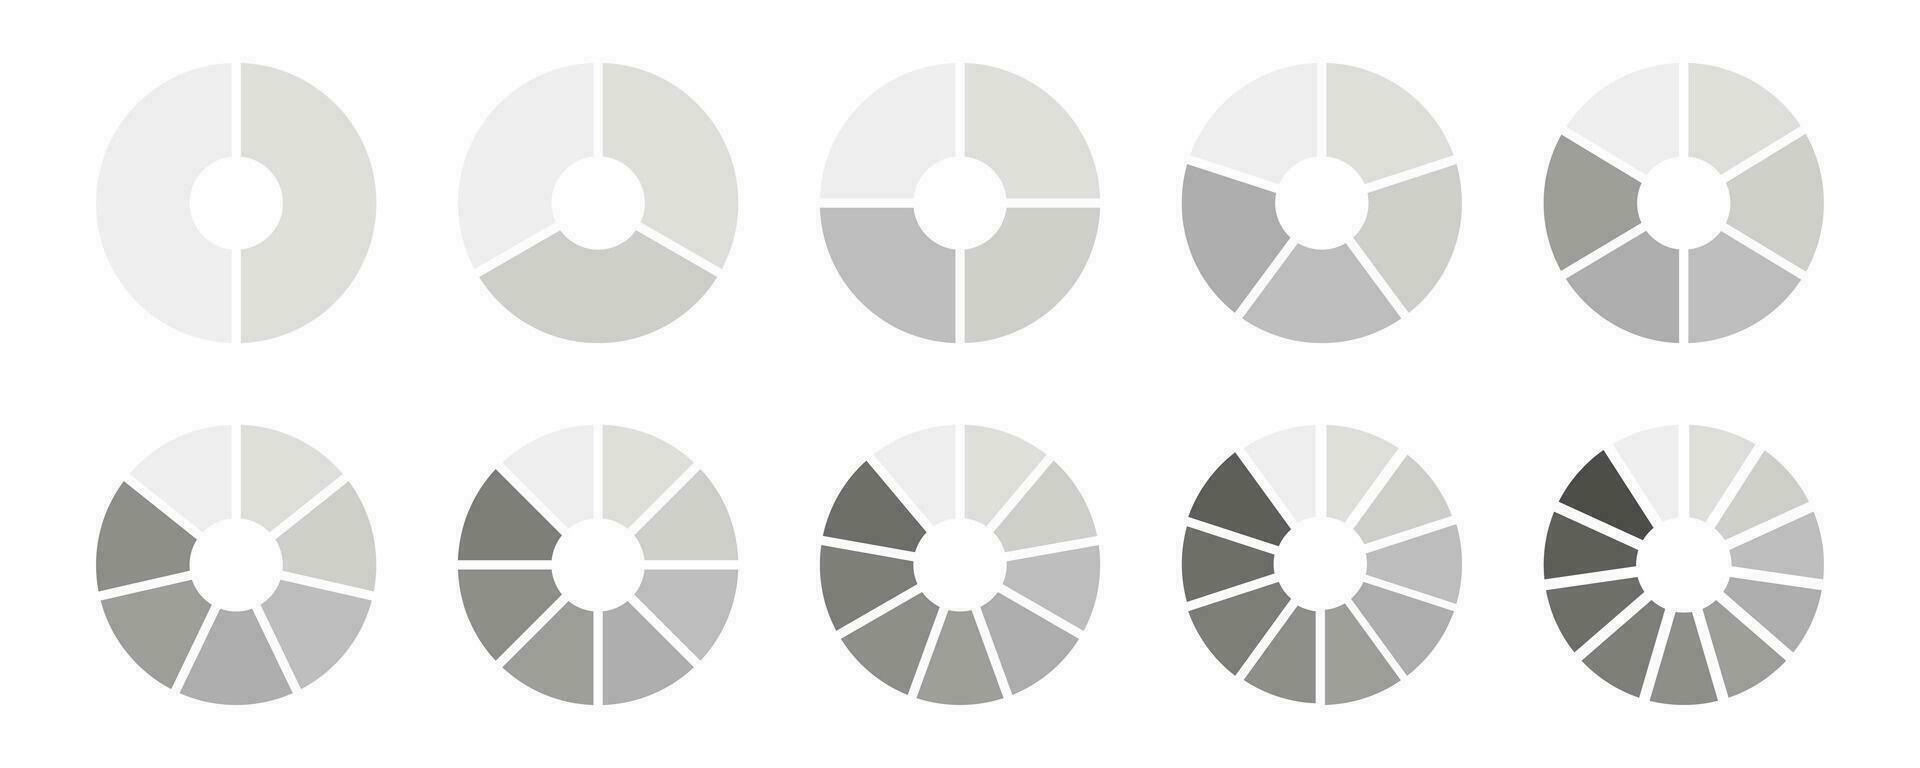 Circle division on equal parts. Wheel divided diagrams with two, three, four, five, six, seven, eight, nine, ten, eleven segments. Infographic monochrome set. Coaching simple blanks. Vector template.